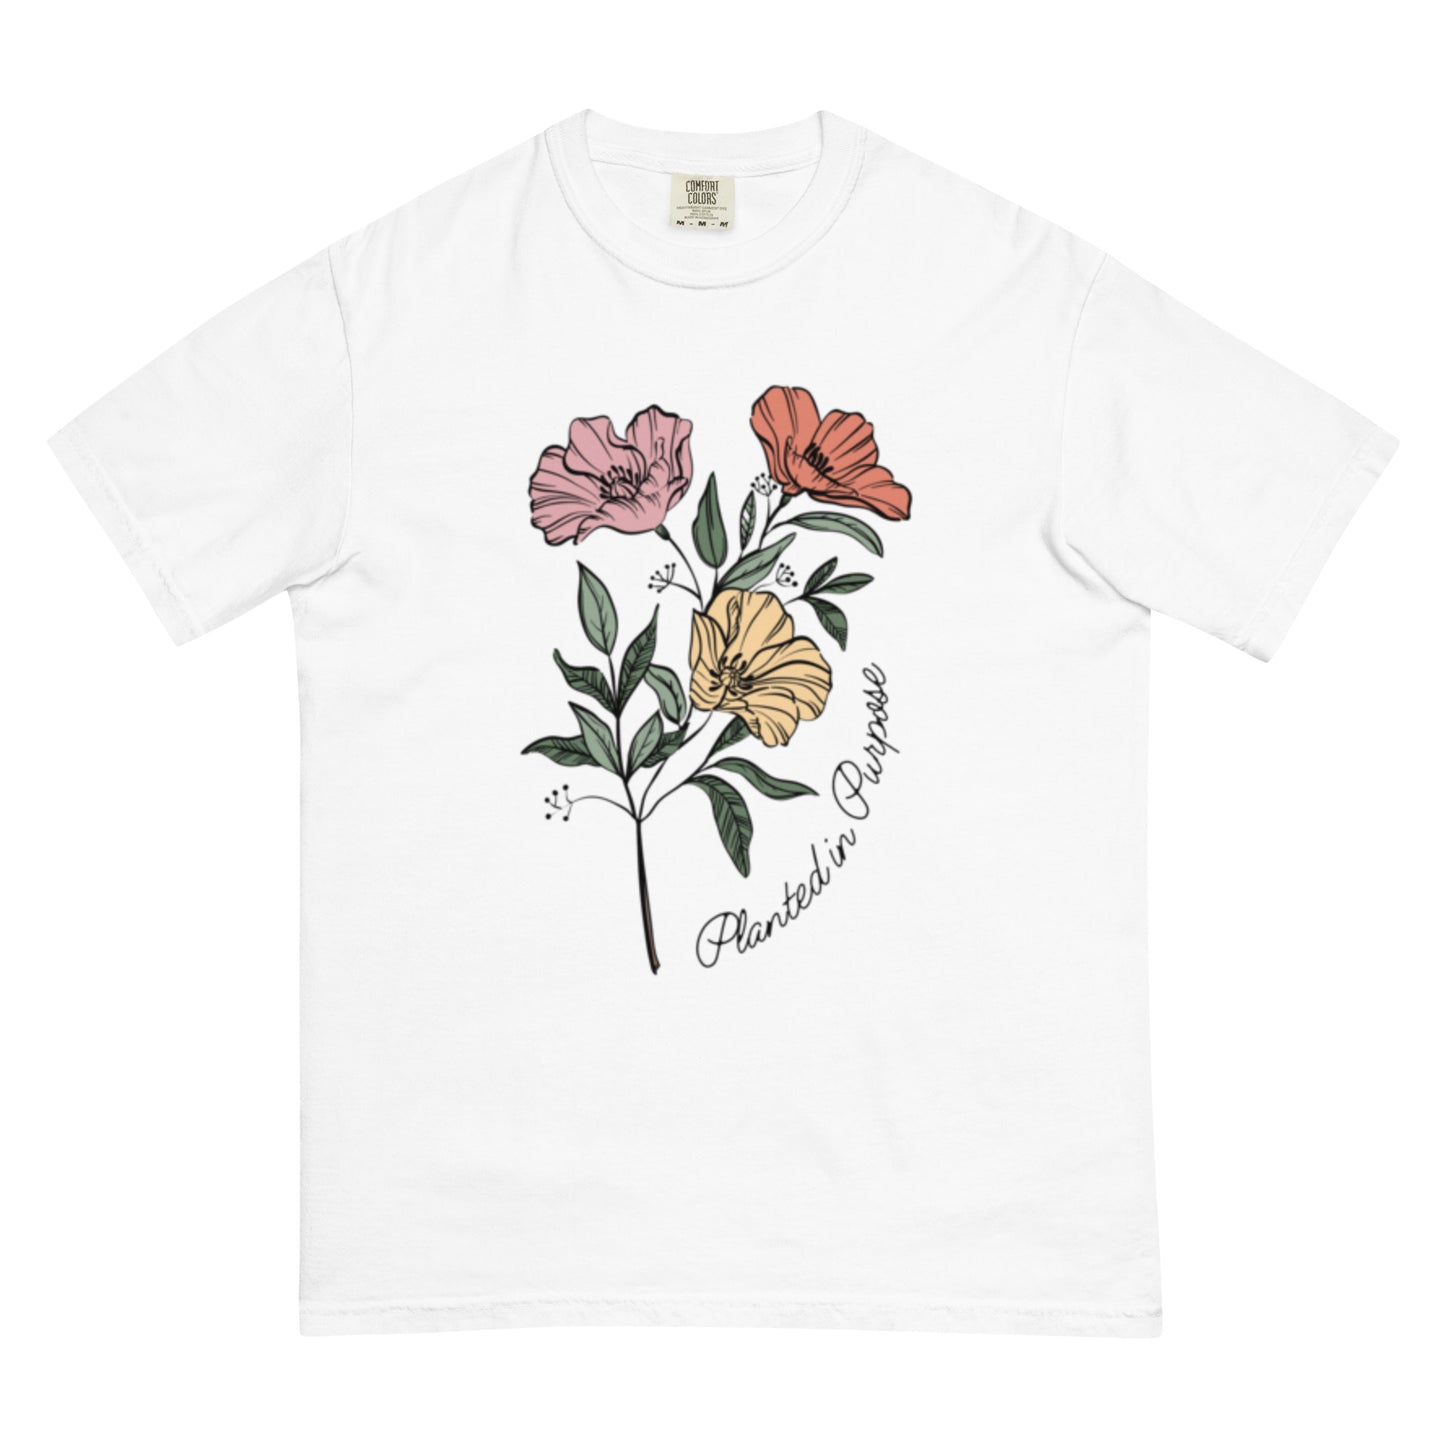 Planted in Purpose heavy tee